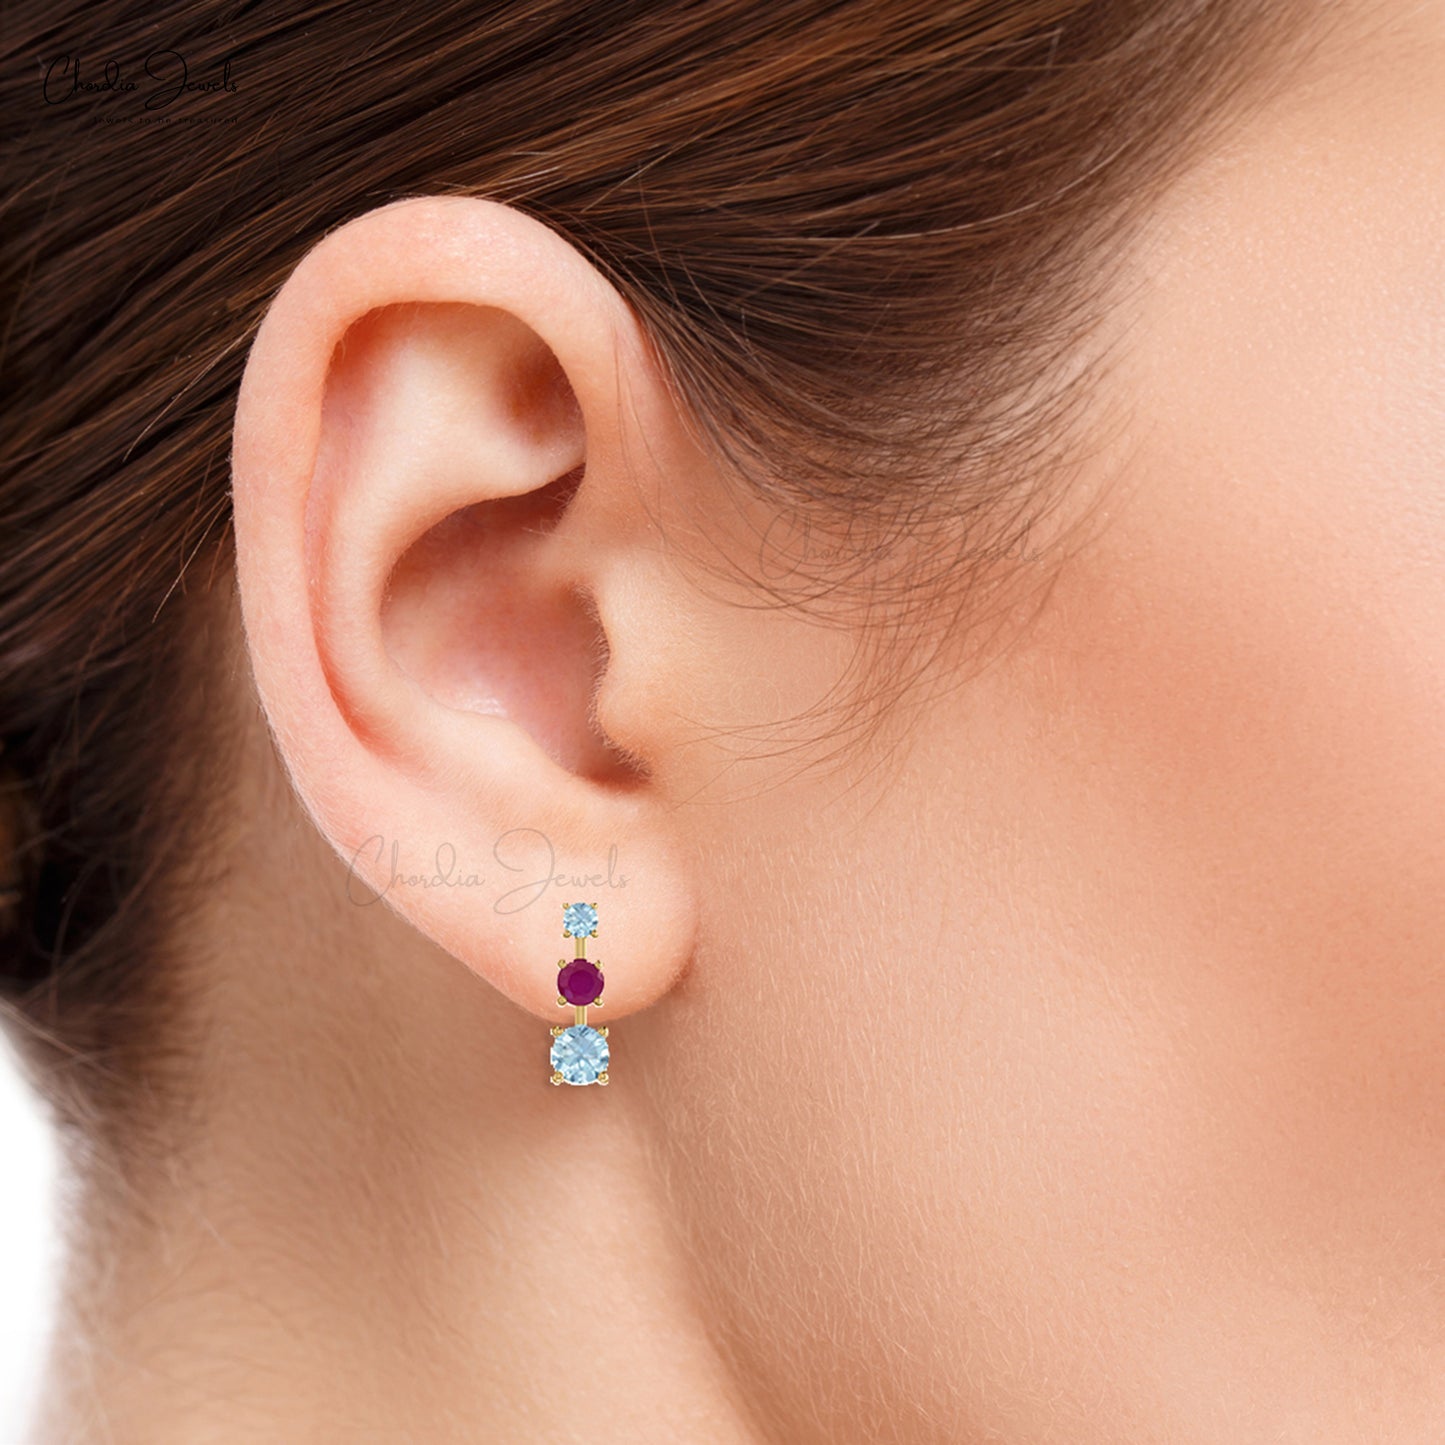 Genuine Ruby & Aquamarine 3 Stone Studs 14k Solid Gold Statement Earrings For New Year Gift